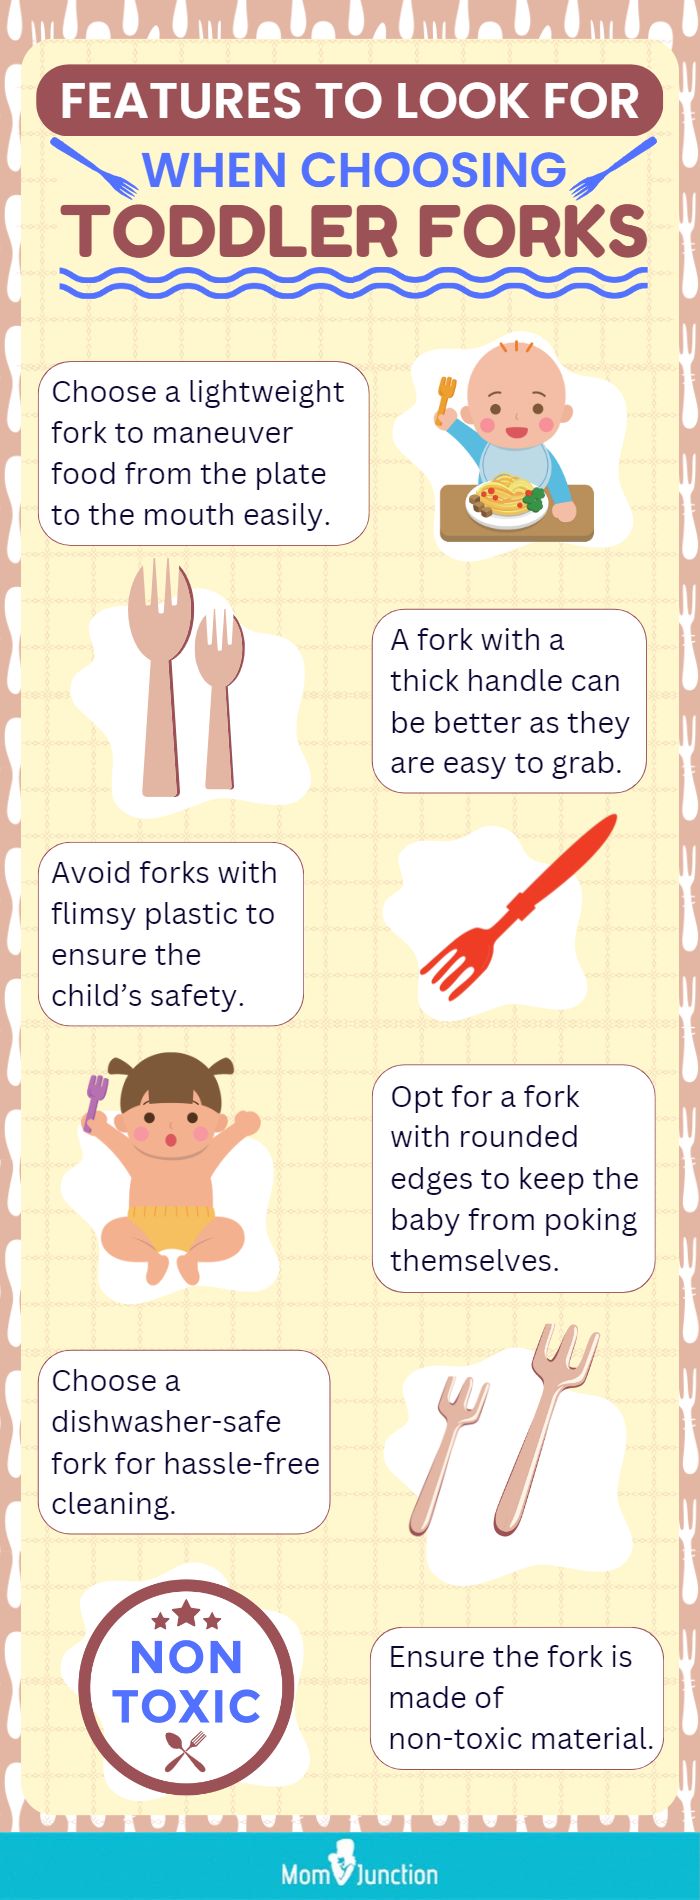 Features To Look For When Choosing Toddler Forks (infographic)